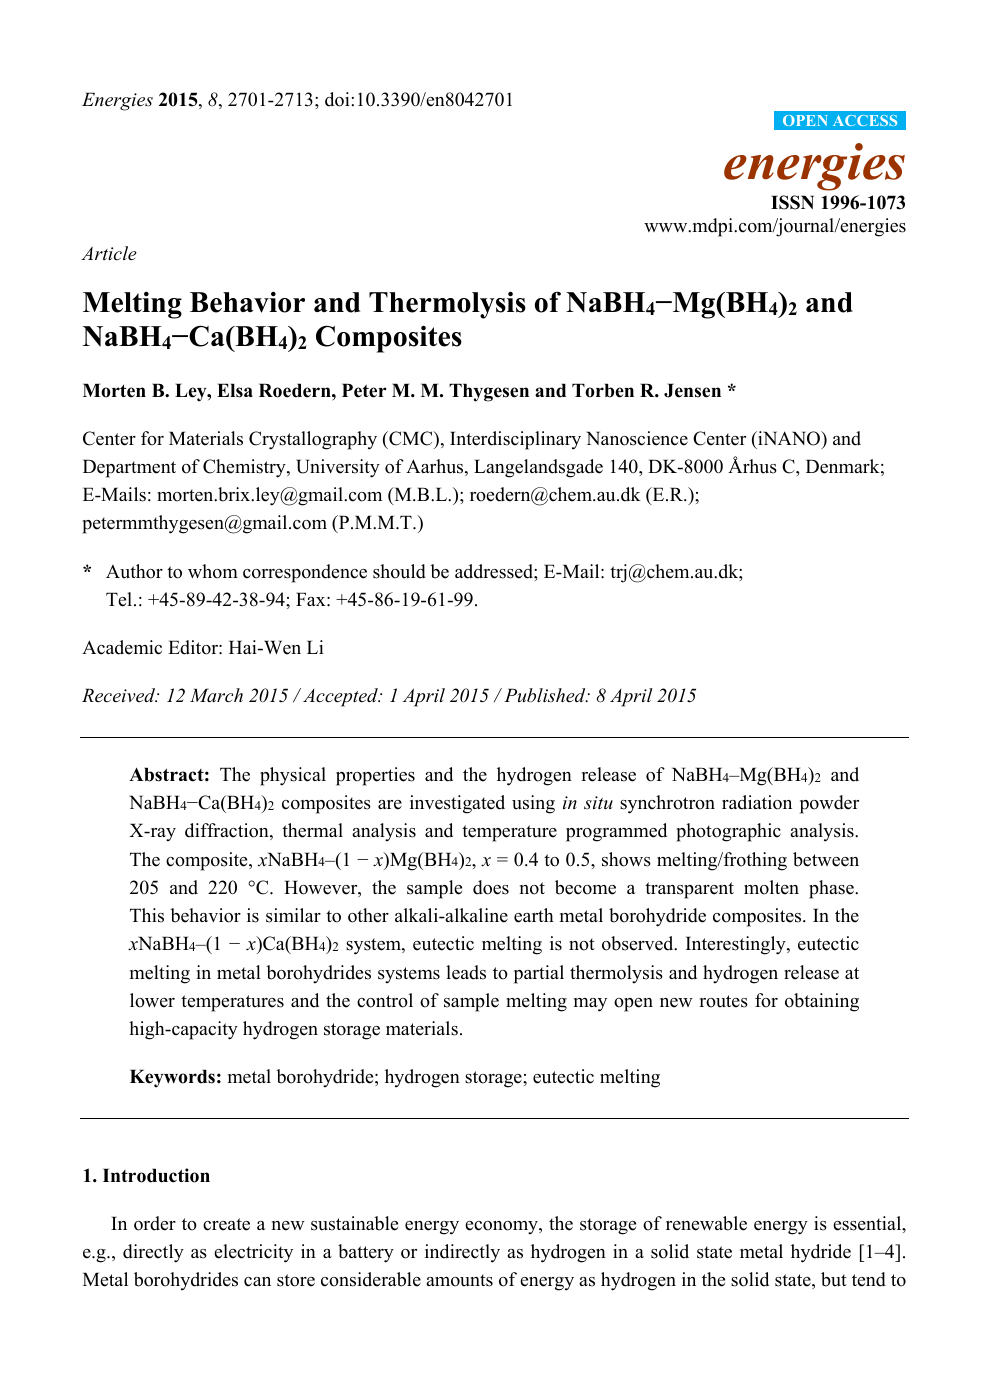 Melting Behavior And Thermolysis Of Nabh4 Mg Bh4 2 And Nabh4 Ca Bh4 2 Composites Topic Of Research Paper In Nano Technology Download Scholarly Article Pdf And Read For Free On Cyberleninka Open Science Hub